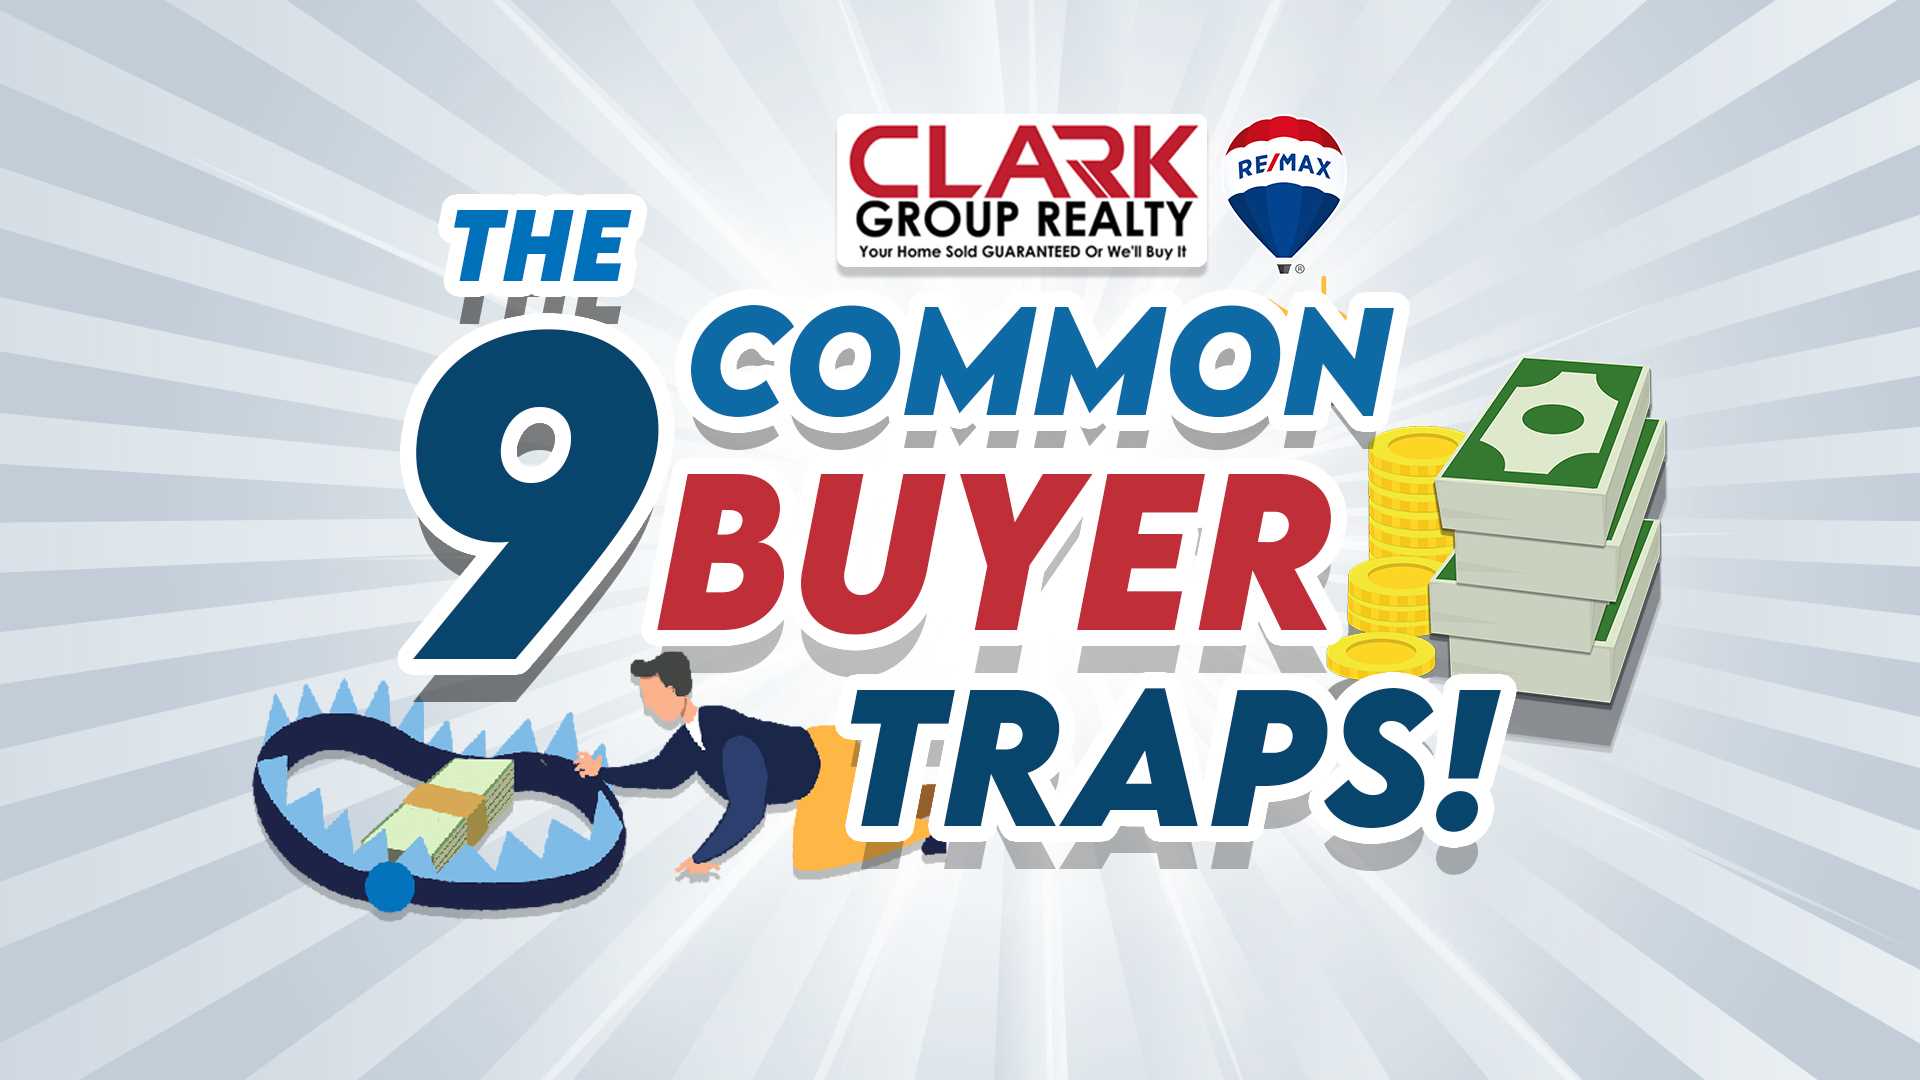 How to Avoid Common Buyer Traps Before Buying a Home?